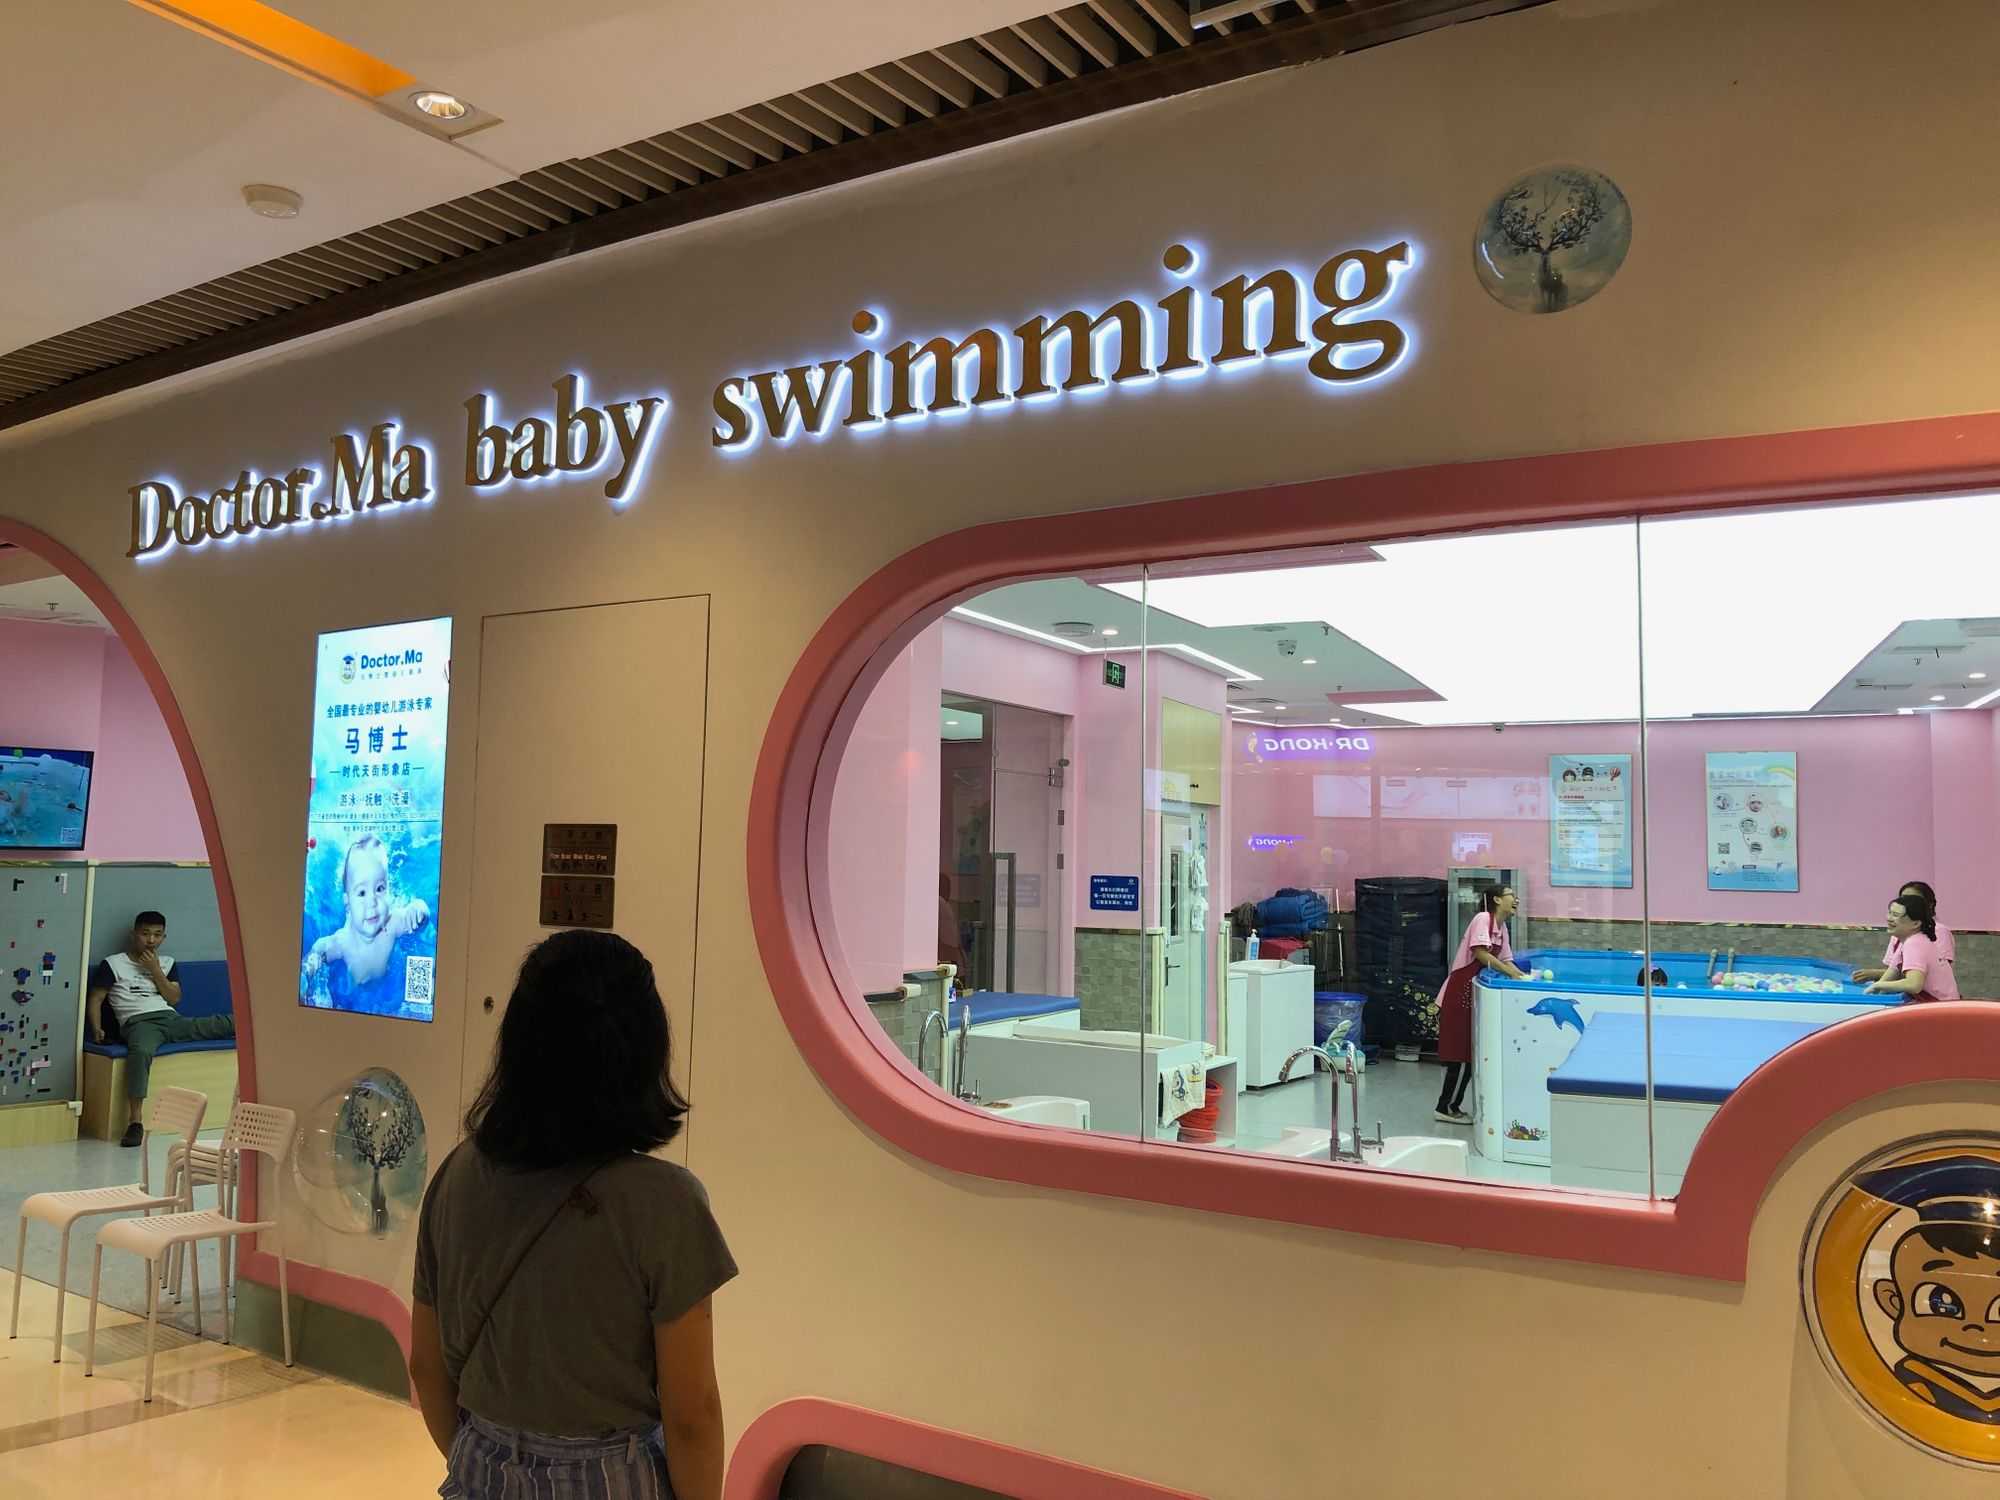 Baby swimming class (Image by author)